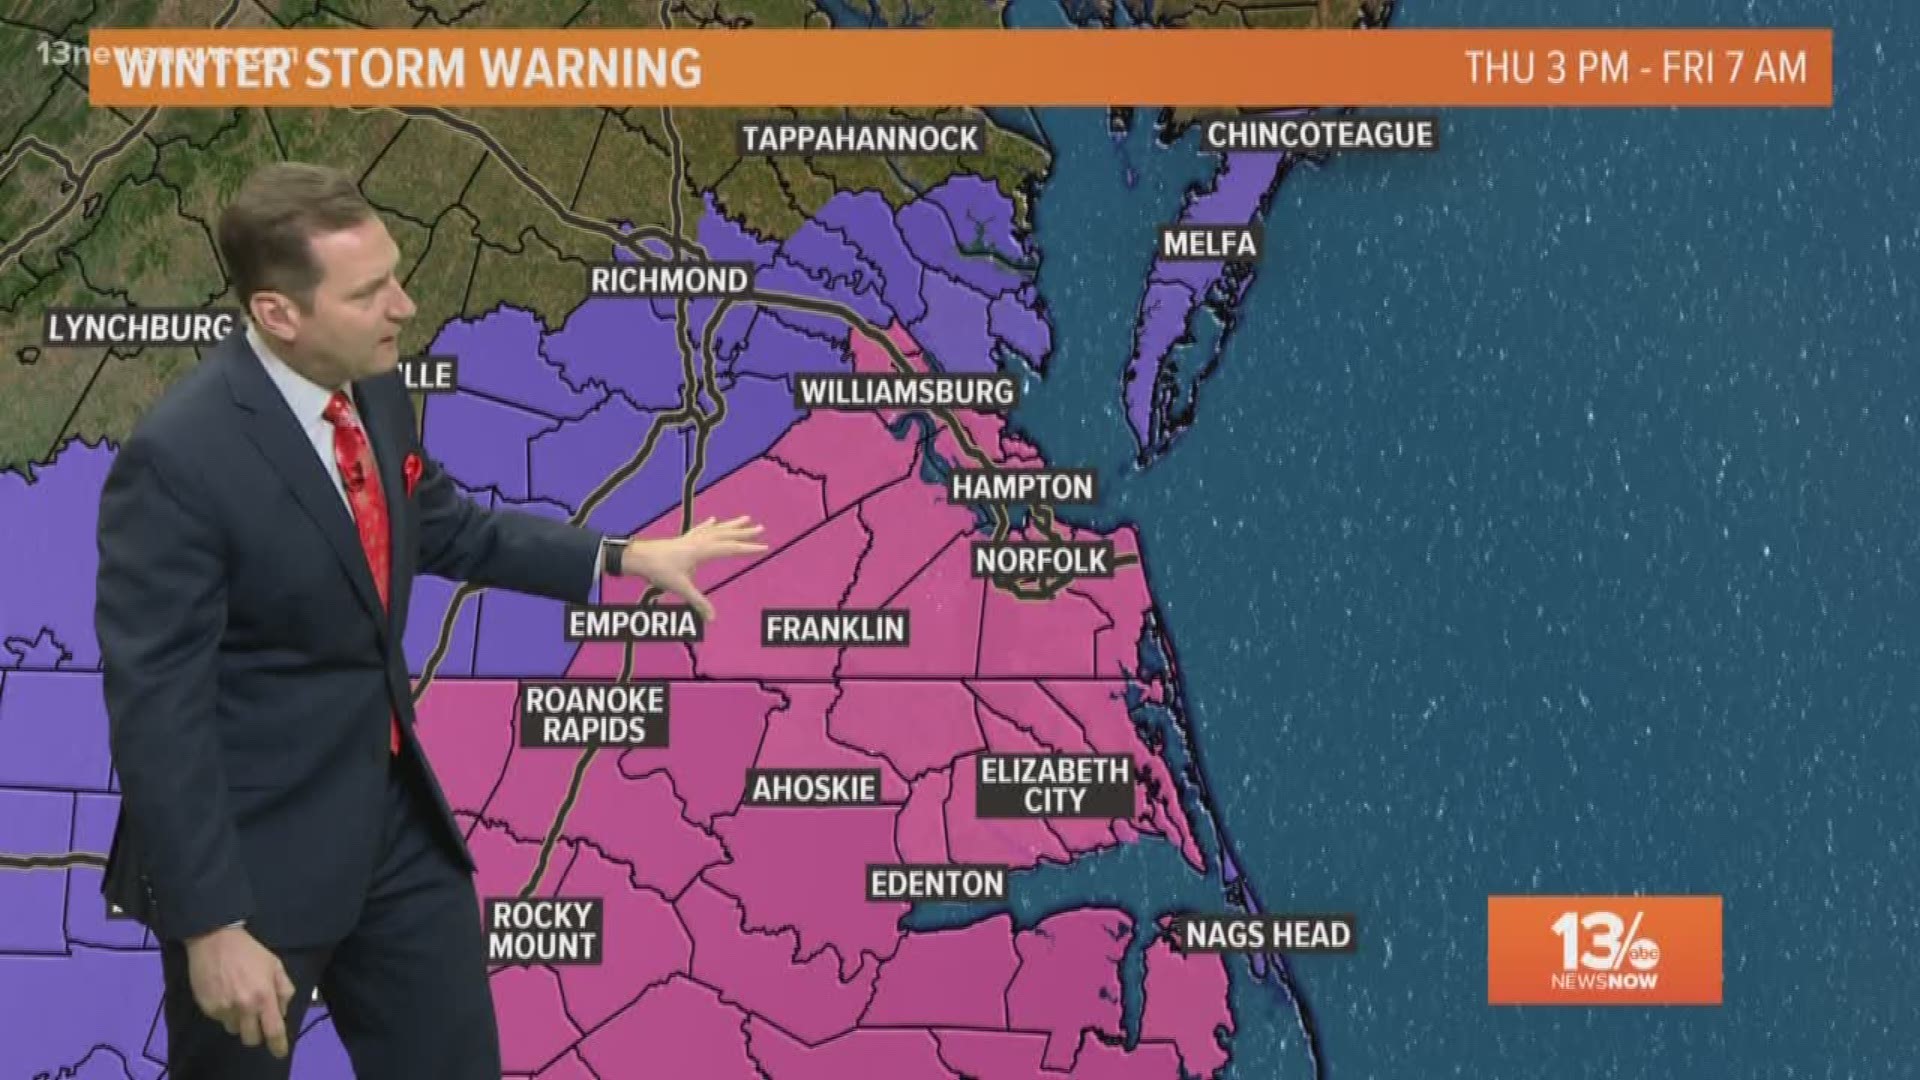 The 13News Now team is staying on top of the Feb. 20 forecast for snow for Hampton Roads and northeast North Carolina.